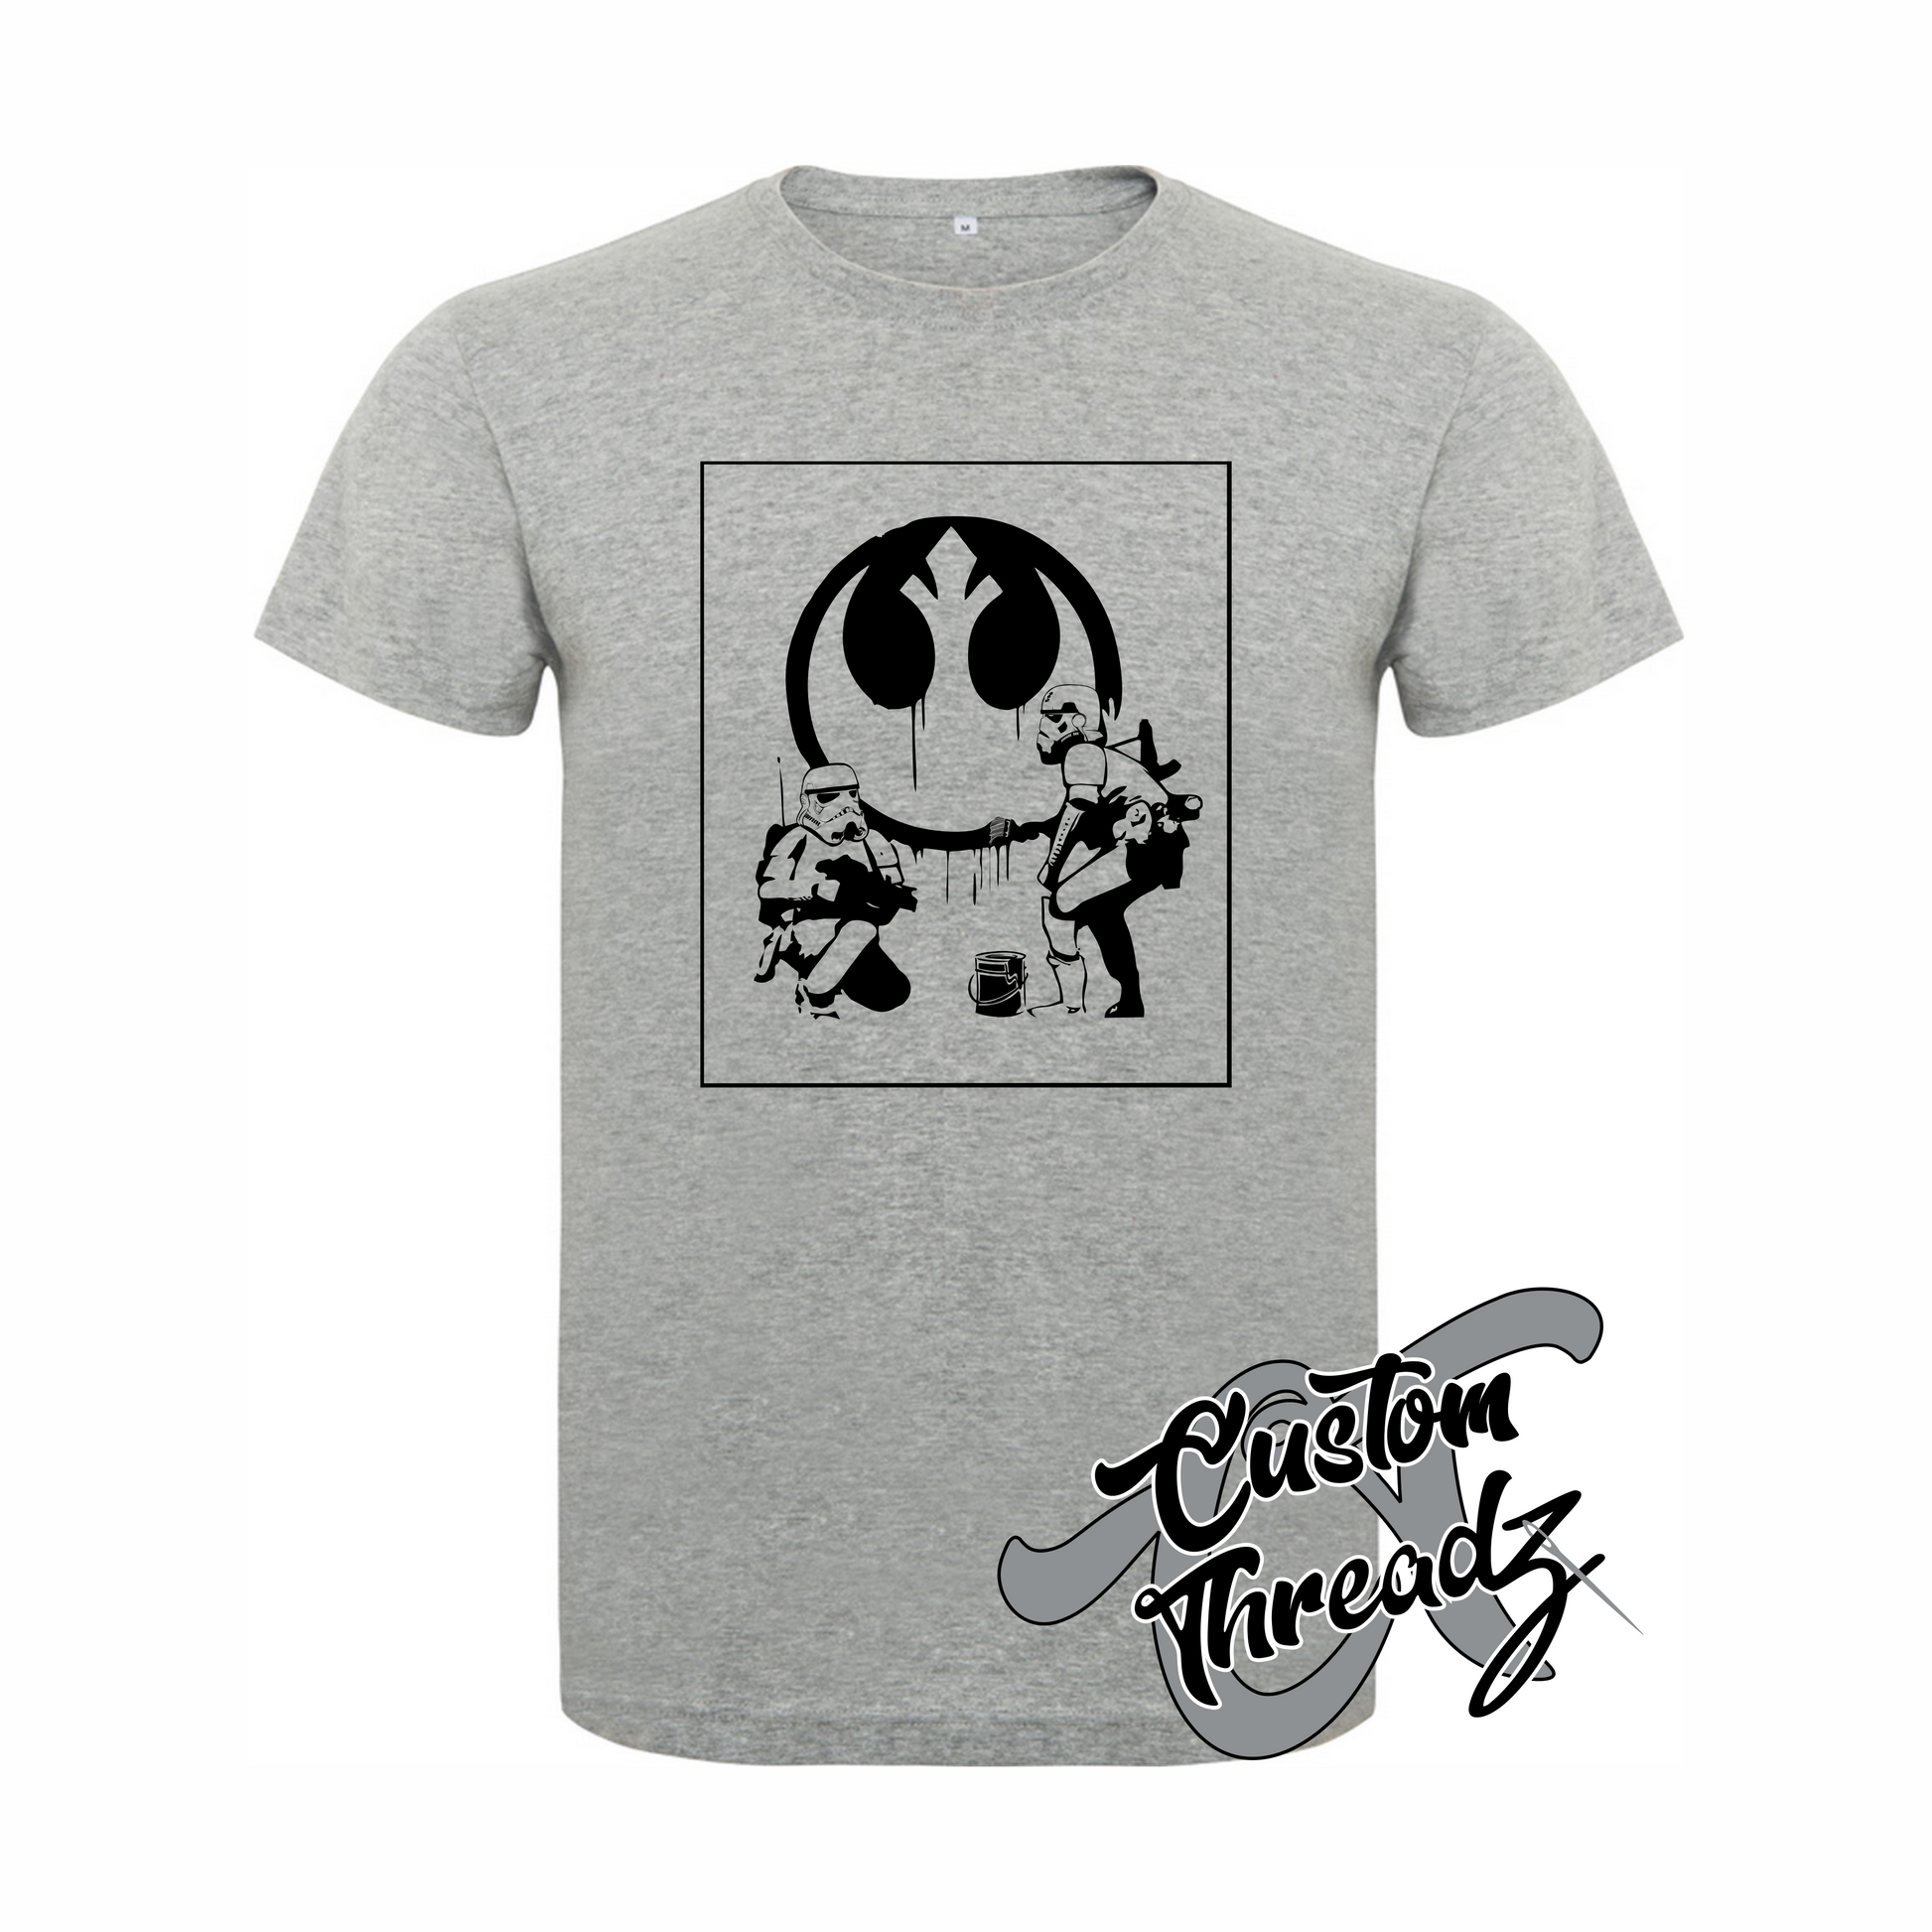 athletic heather grey youth t-shirt with stormtroopers rebel alliance star wars DTG printed design